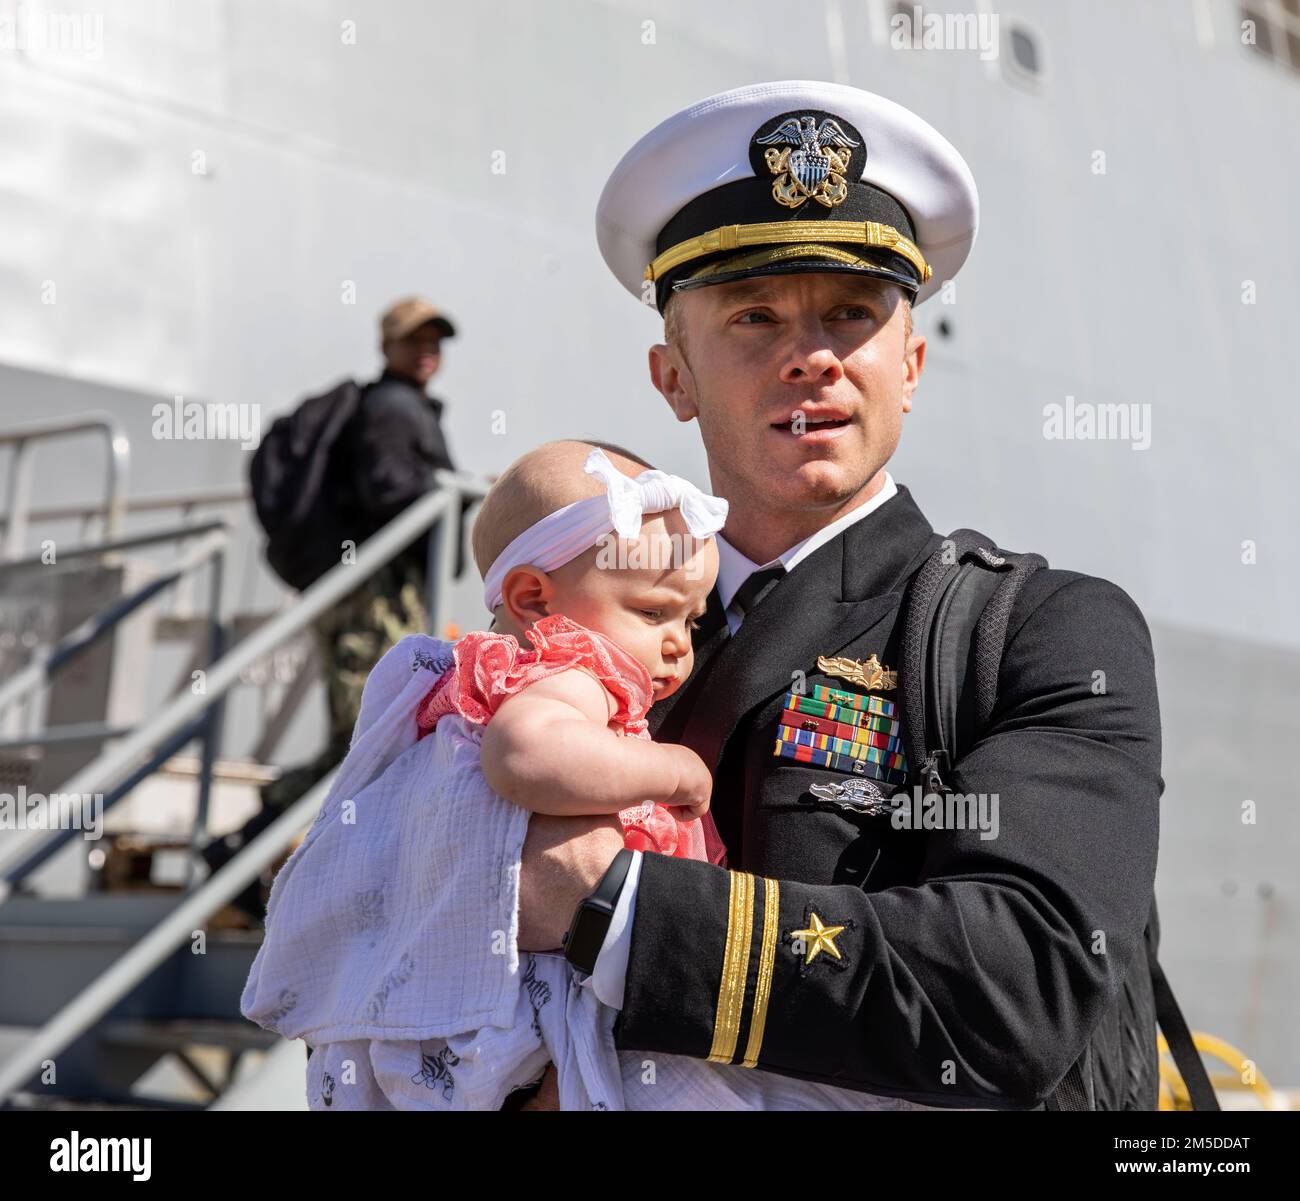 220304-N-LR905-2179  SAN DIEGO (March 4, 2022) – Lt. j.g. Mather, currently assigned to amphibious transport dock ship USS Portland (LPD 27), embraces his child for the first time March 4. Portland, a part of the Essex Amphibious Ready Group, returned to Naval Base San Diego March 4 after a deployment to U.S. 3rd, 5th, and 7th Fleets in support of regional stability and a free and open Indo-Pacific. Stock Photo